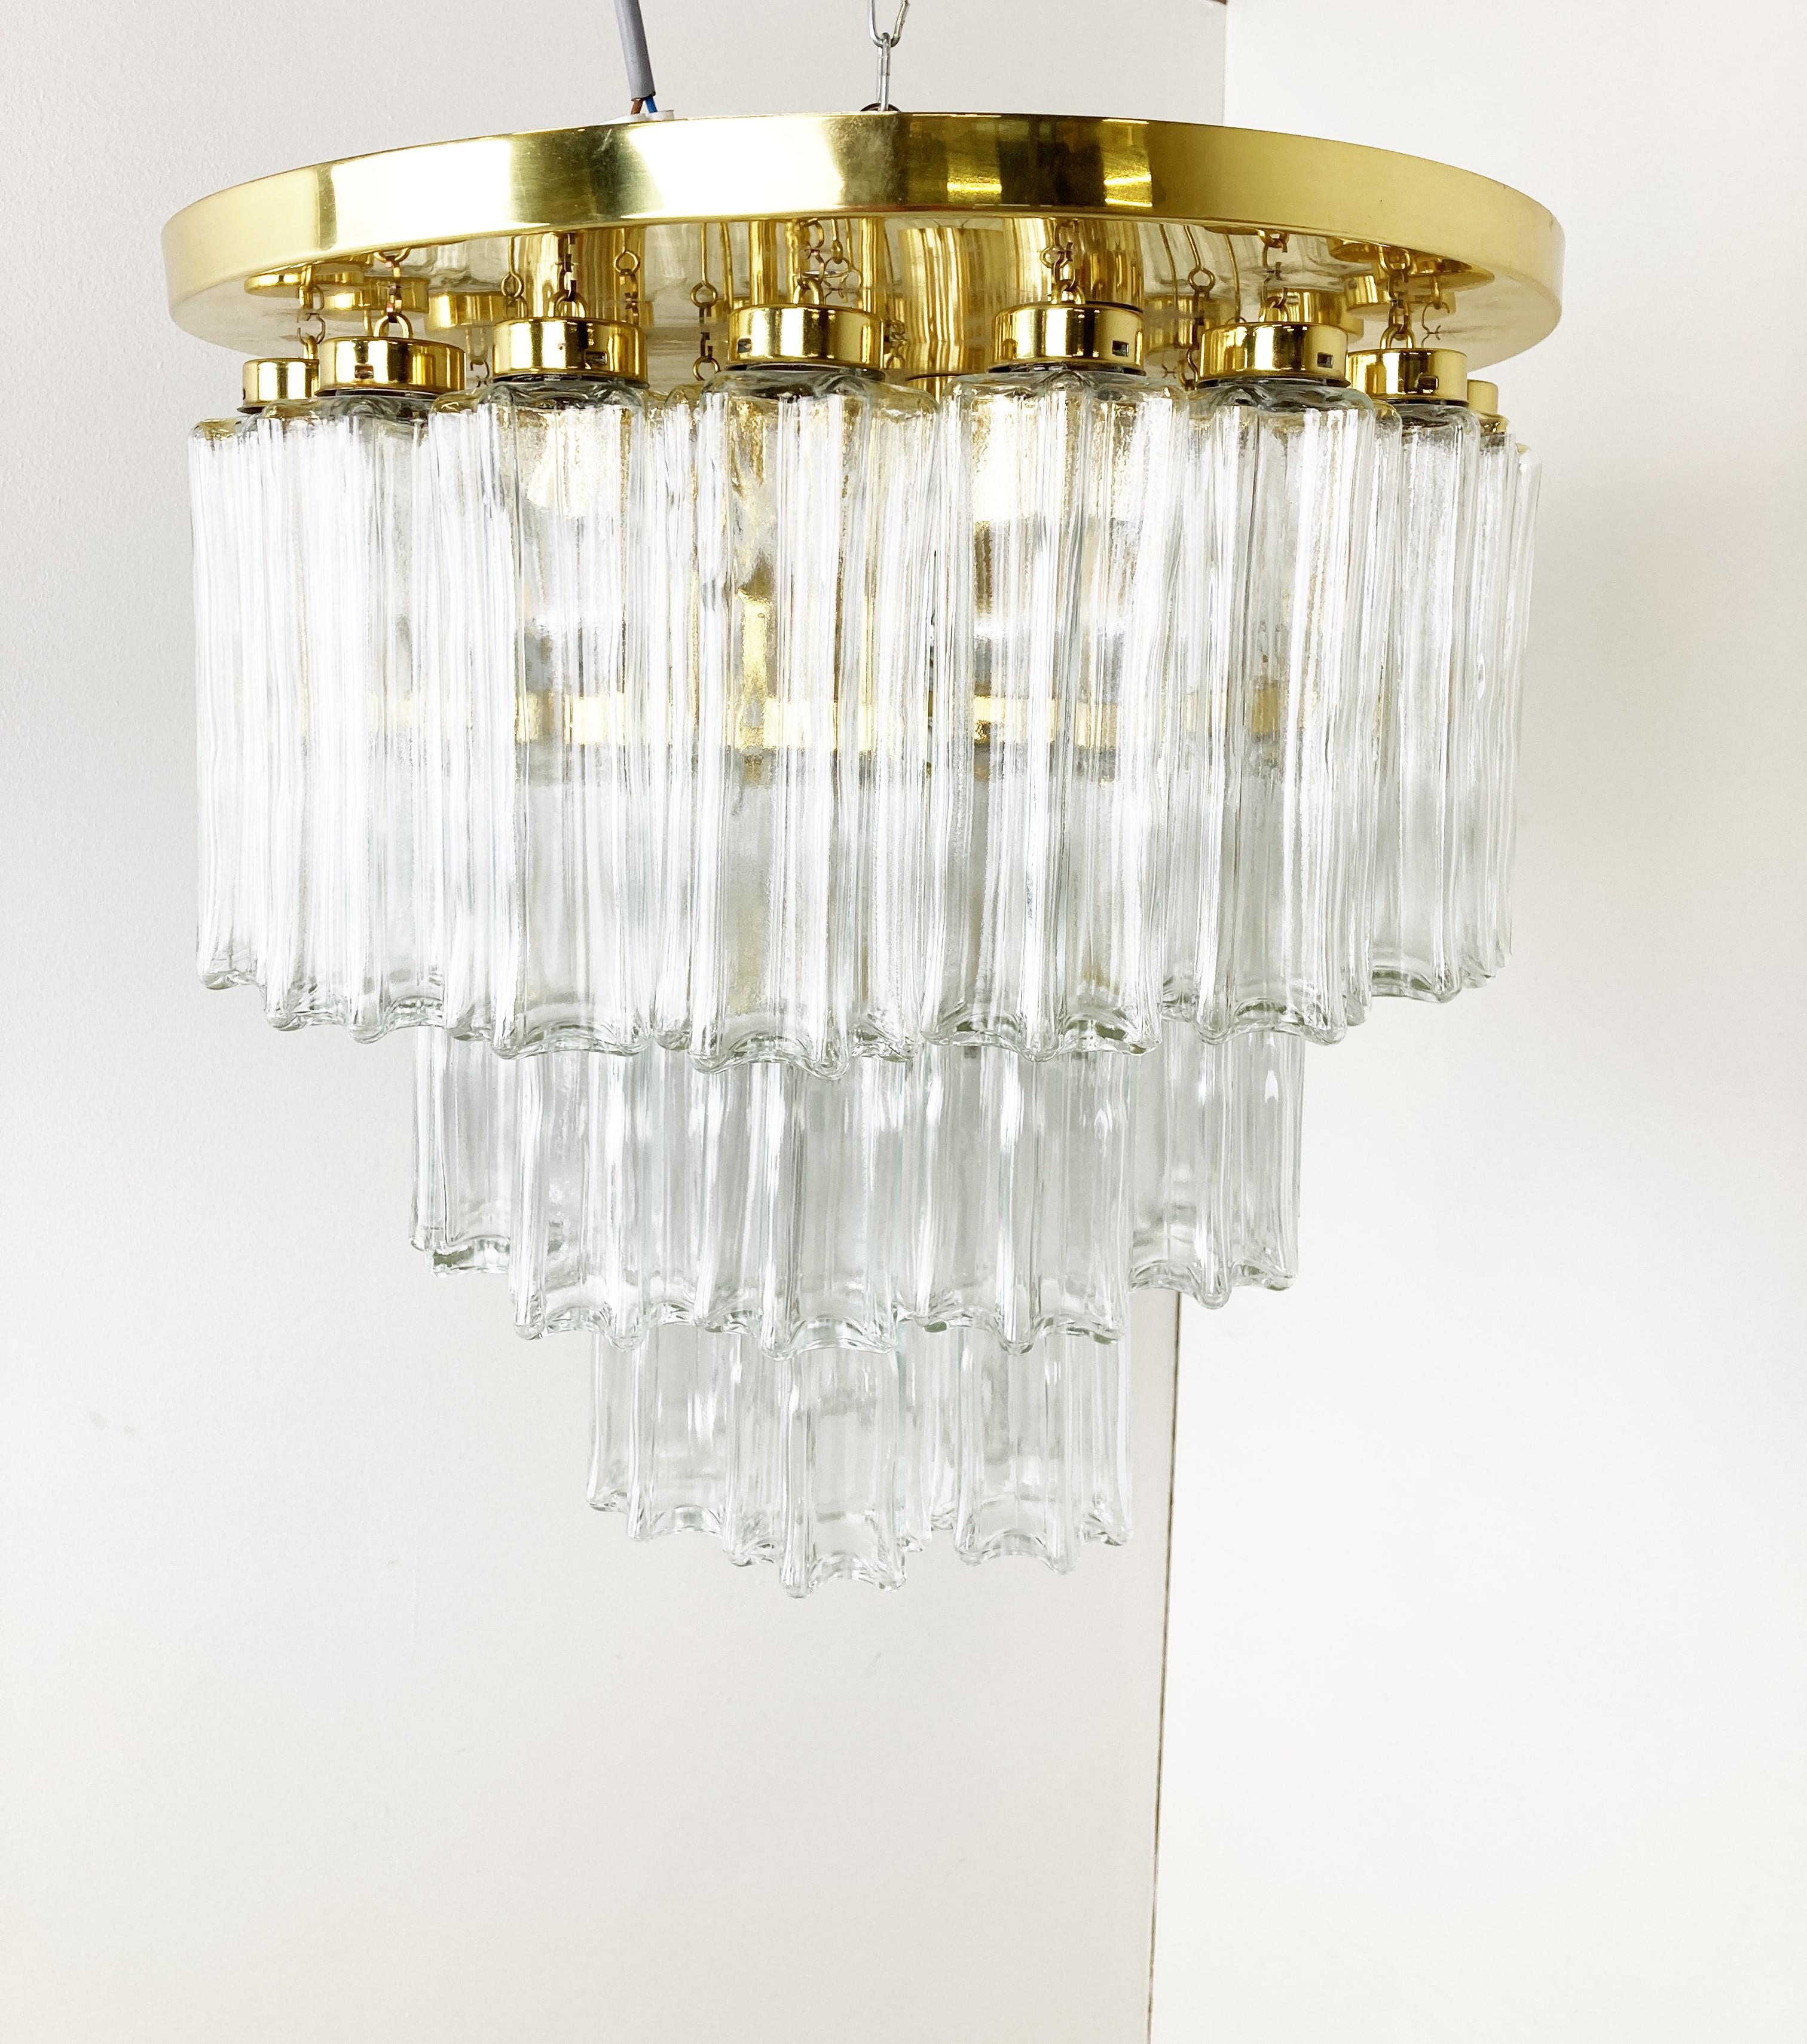 Striking flush mount chandelier by Glashutte Limburg with hand made glass pendants and a brass frame.

The chandelier emits a stunning light.

Tested and ready to use with regular E27 light bulbs

1970s - Germany

Dimensions:
Height: